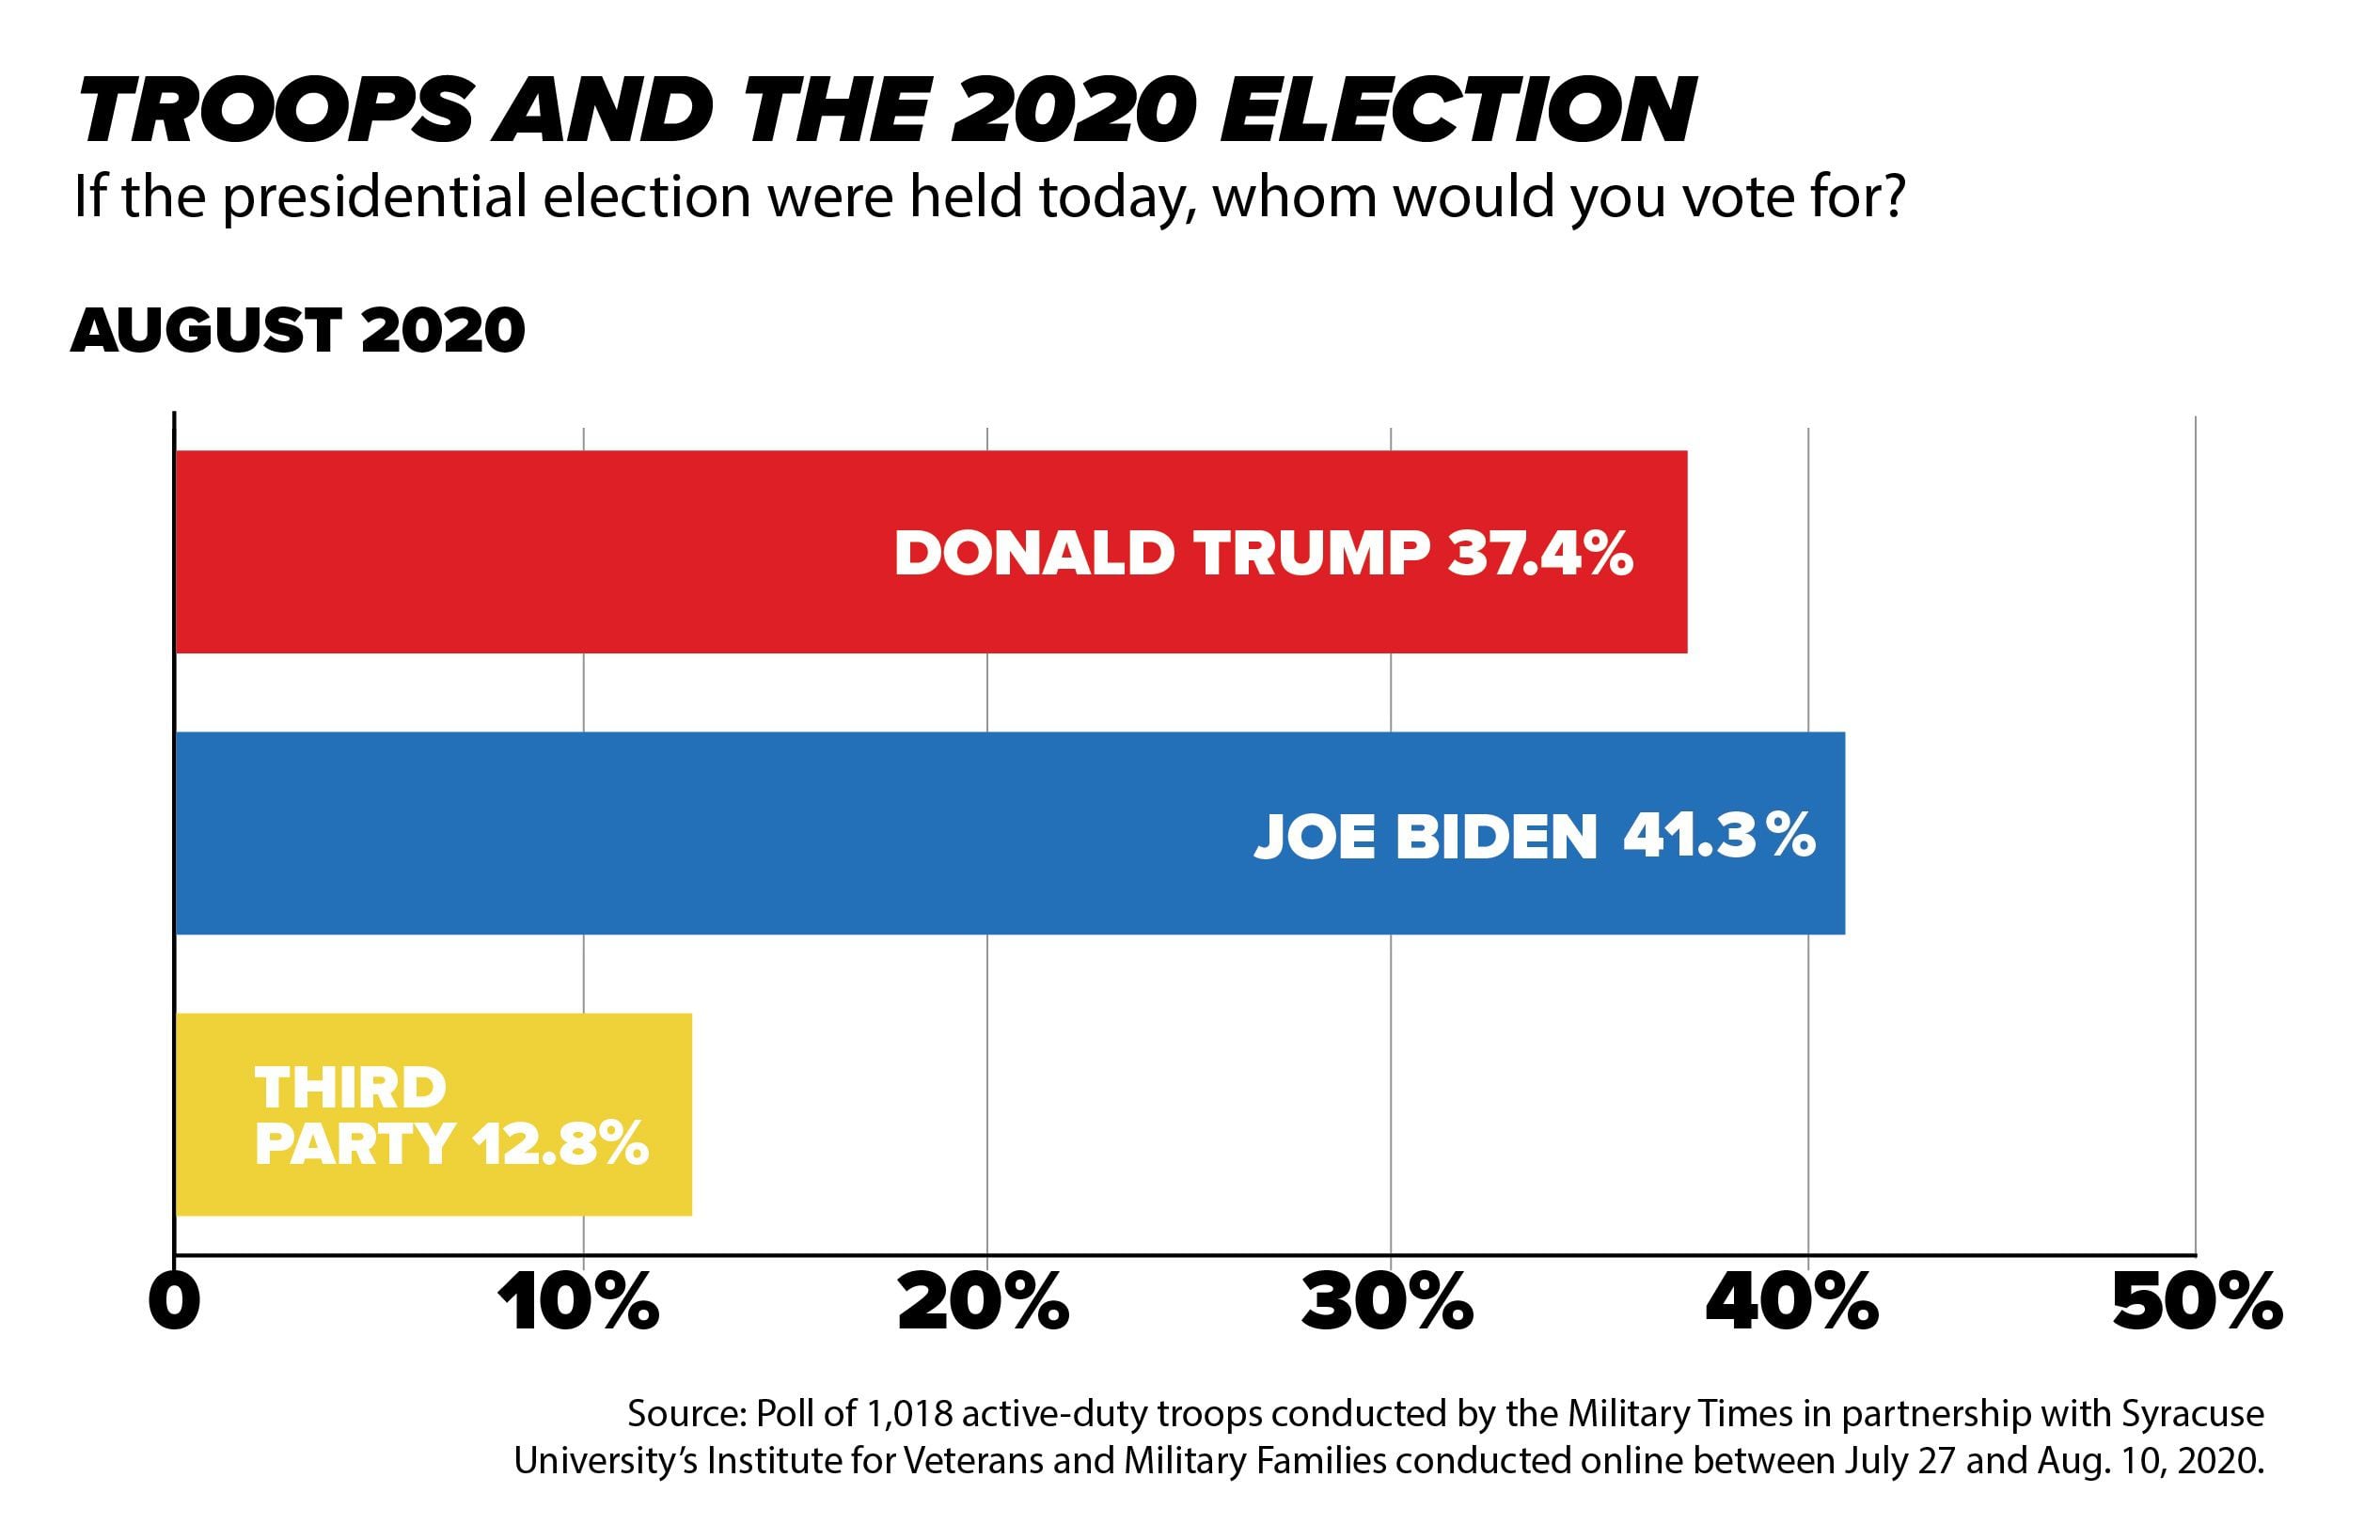 Trump's popularity slips in latest Military Times — more troops say they'll vote for Biden